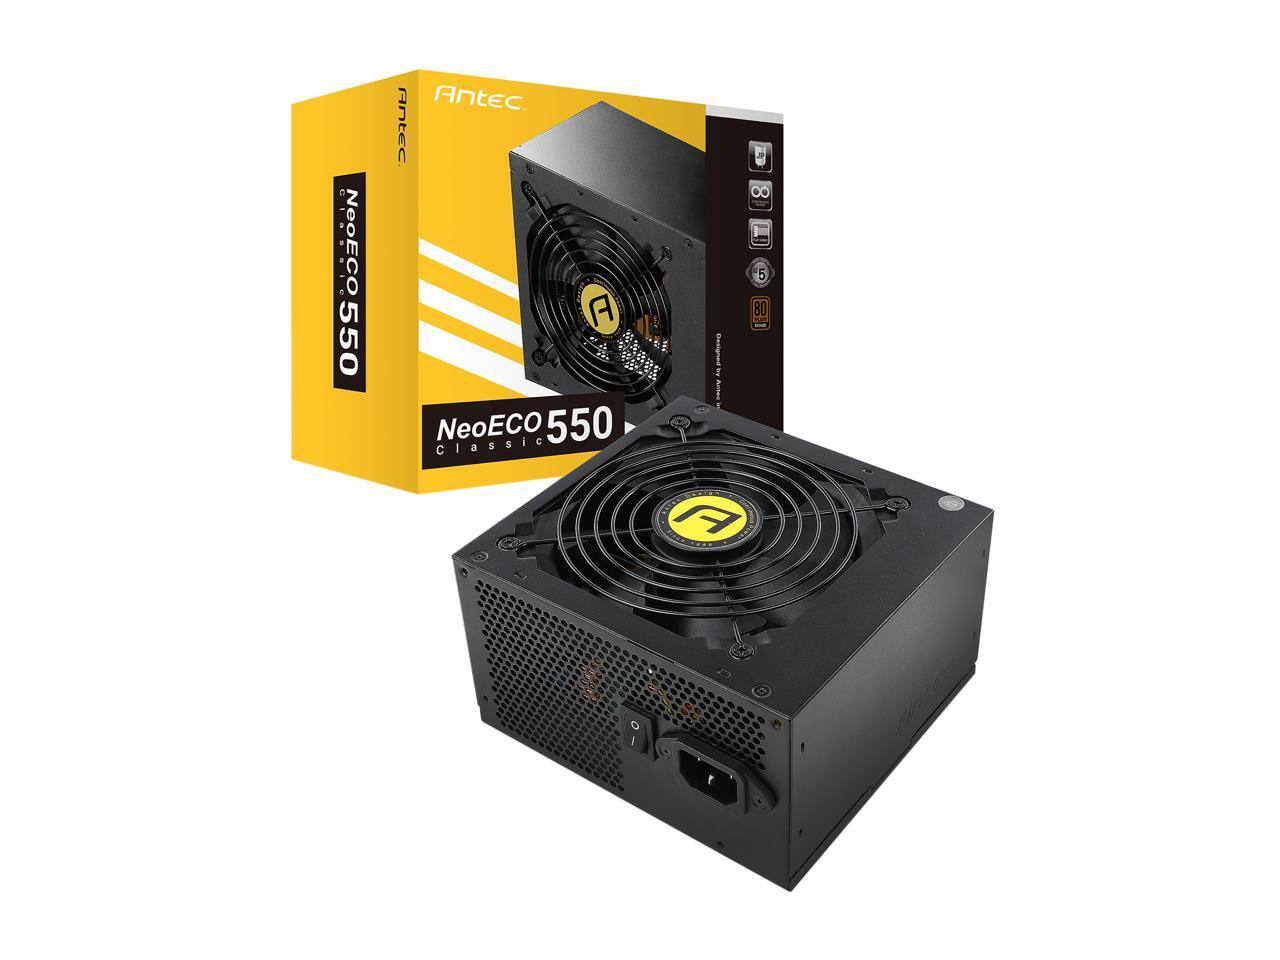 Antec NeoECO Classic NE550C V2, 550W 80 PLUS Bronze Certified - $39.99 (after $25 Mail-in Rebate) + Free Shipping